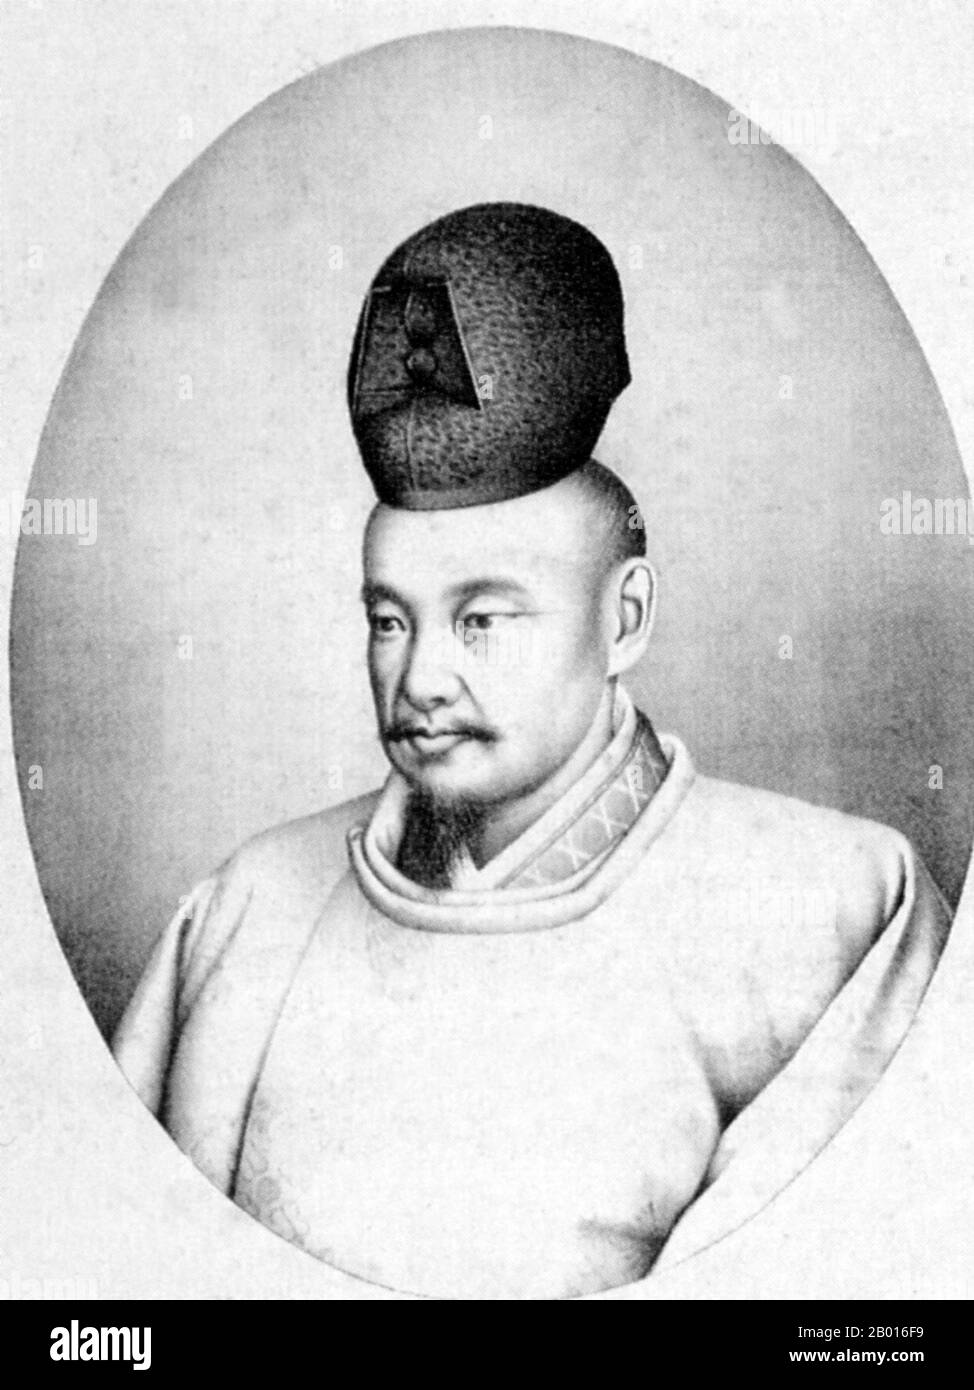 Japan: Tokugawa Nariaki (4 April 1800 - 29 September 1860), Daimyo of Mito Domain (r. 1829-1844). Portrait, mid-19th century.  Tokugawa Nariaki, born Torasaburo and also known as Keisaburo, was a prominent Japanese daimyo who ruled the Mito domain (now Ibaraki prefecture). He became daimyo in 1829, and was leader of the Joi ('expel the barbarian') party, who were xenophobic and favoured restoring power to the Emperor as well as isolating Japan from the world. His actions led to the rise of nationalism and the Meiji Restoration. His son, Tokugawa Yoshinobu, would become Japan's last shogun. Stock Photo